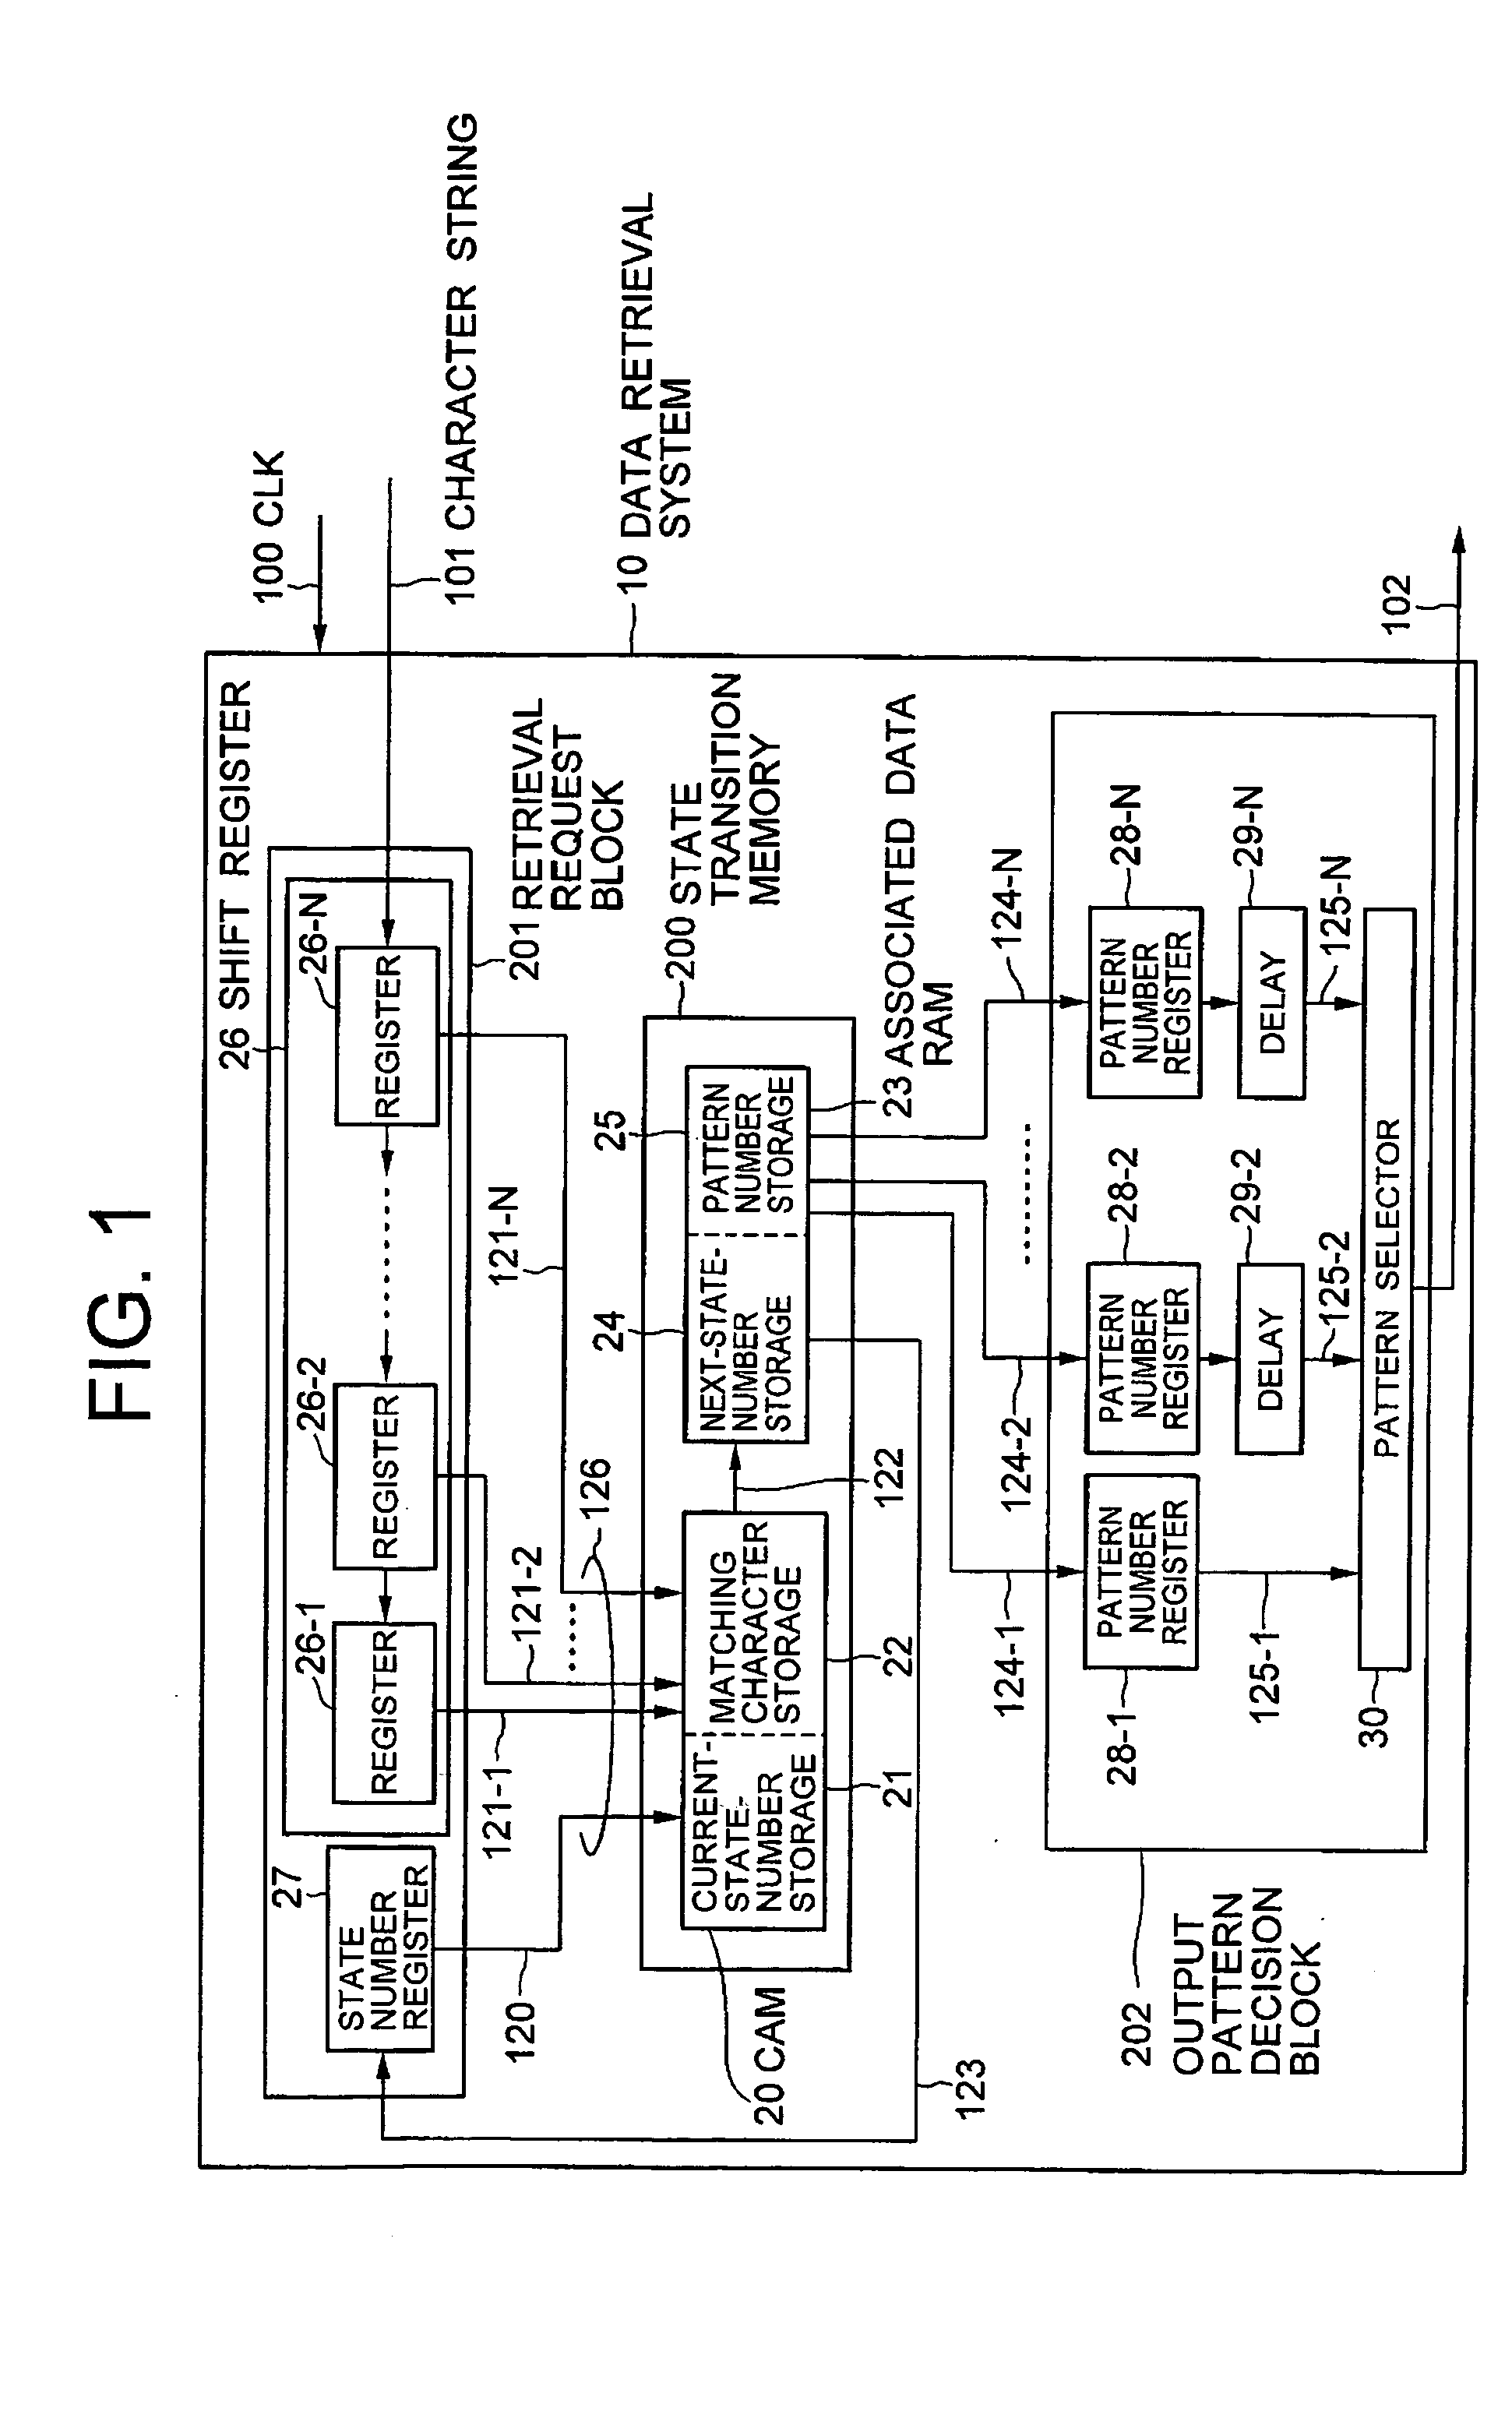 Method and system for retrieving a data pattern